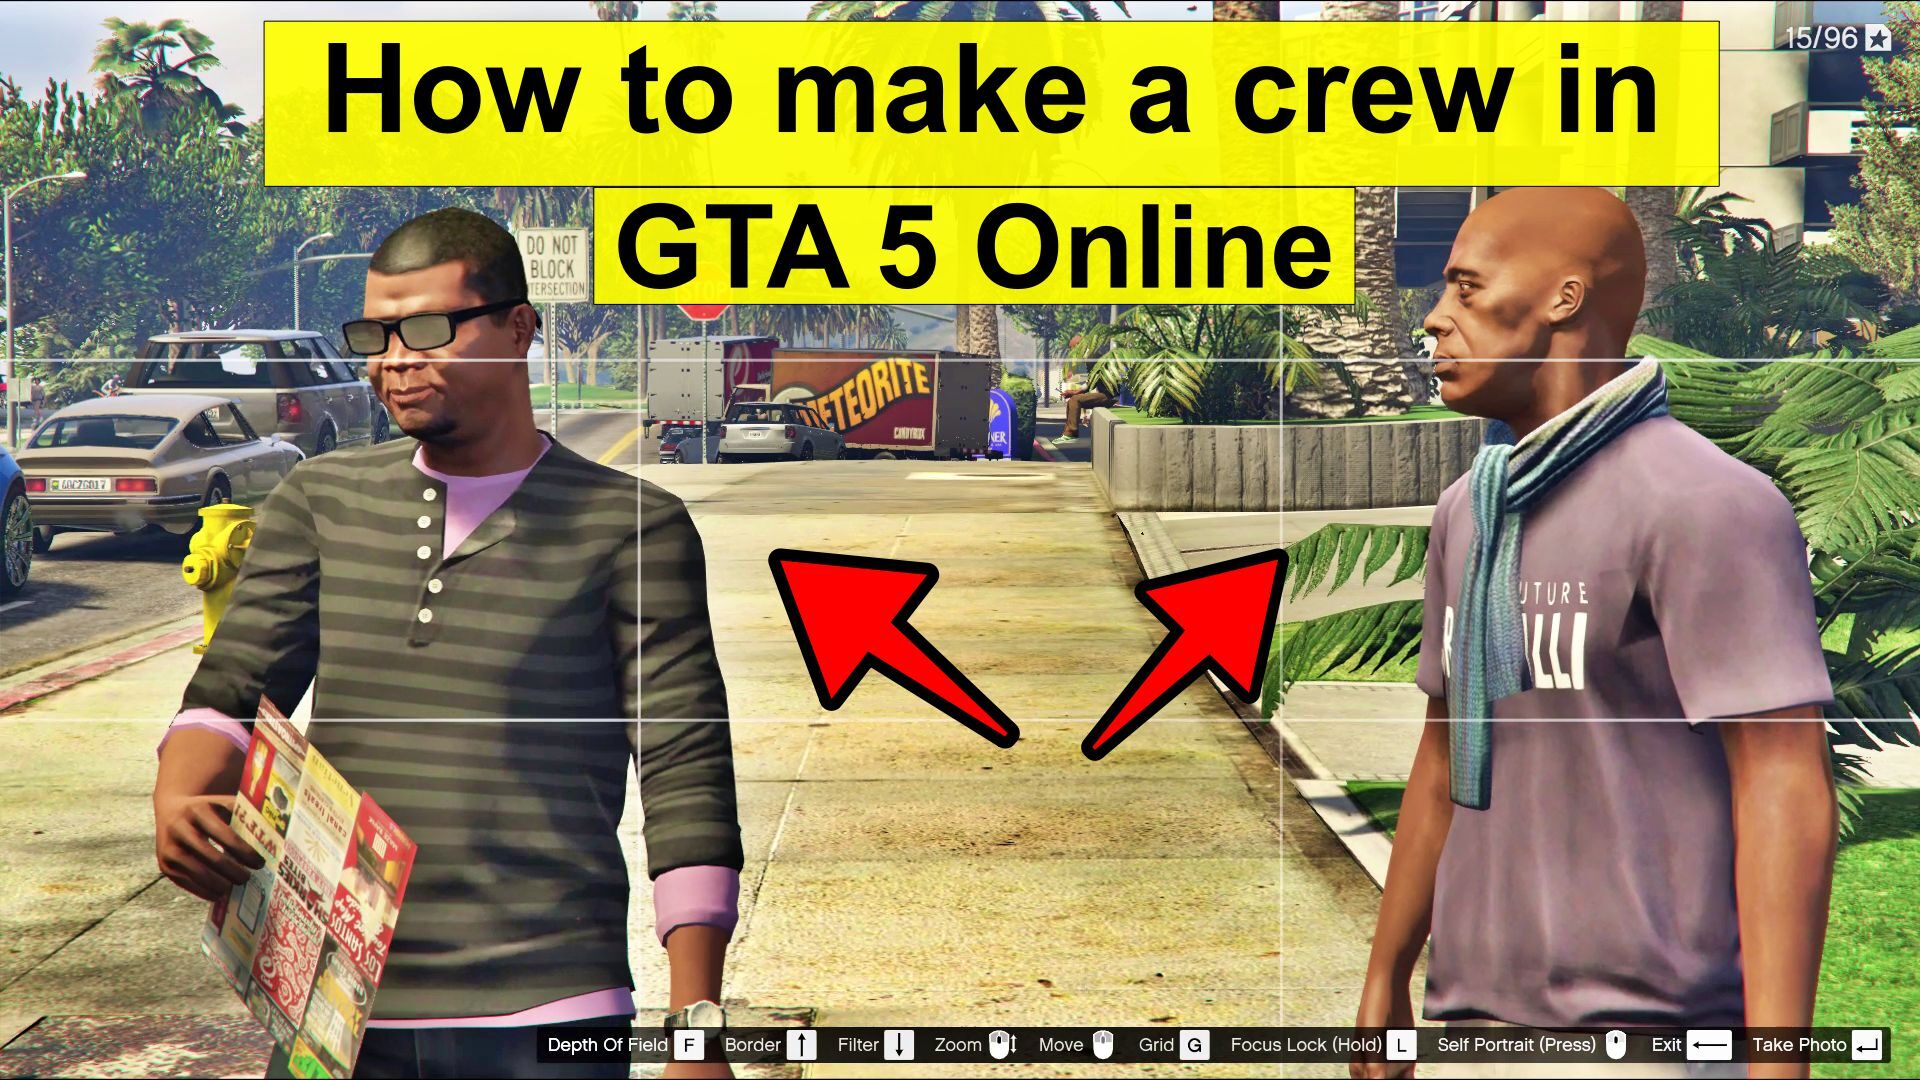 How to make a crew in GTA 5 Online